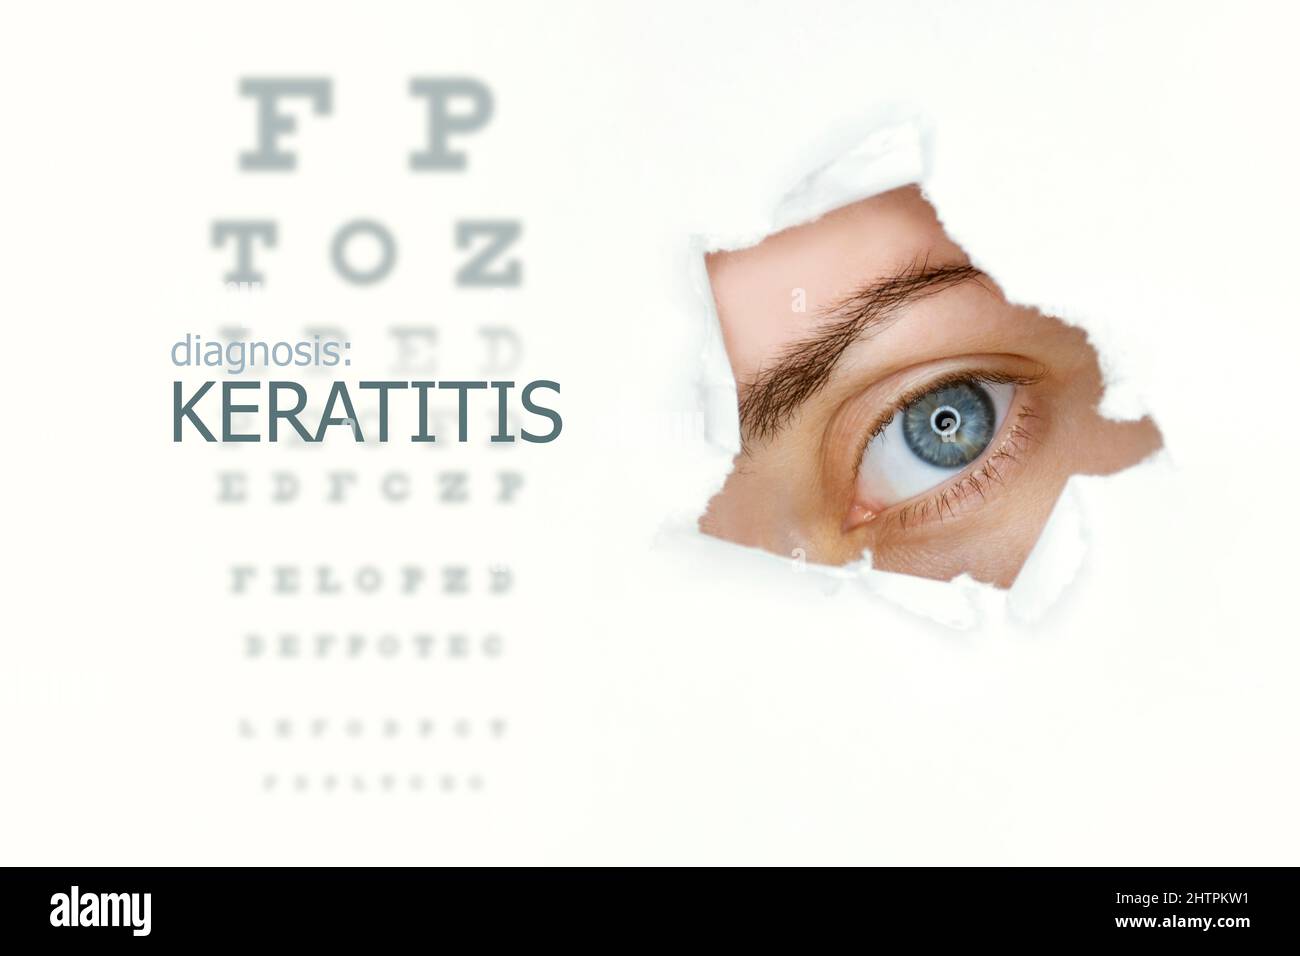 Keratitis disease poster with eye test chart and blue eye.  Isolated on white Stock Photo